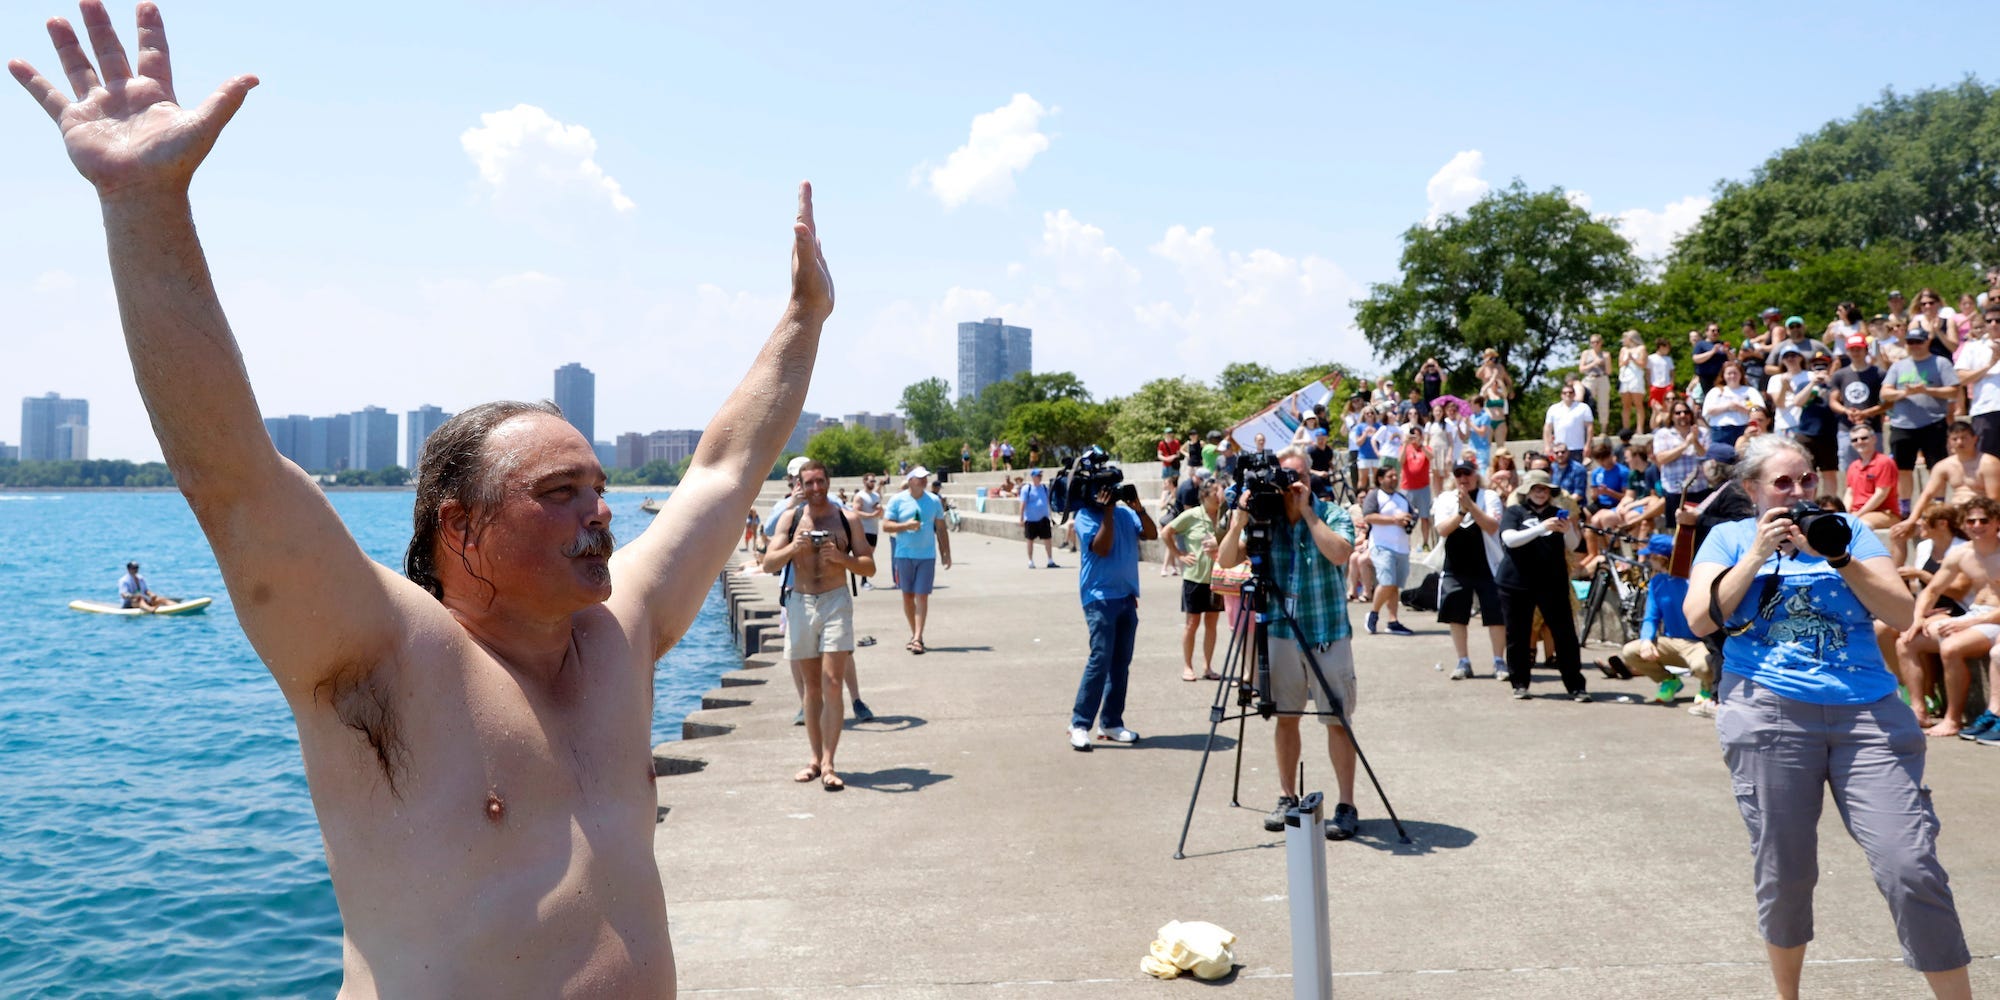 Dan O'Conor, the "Great Lake Jumper," with his arms up